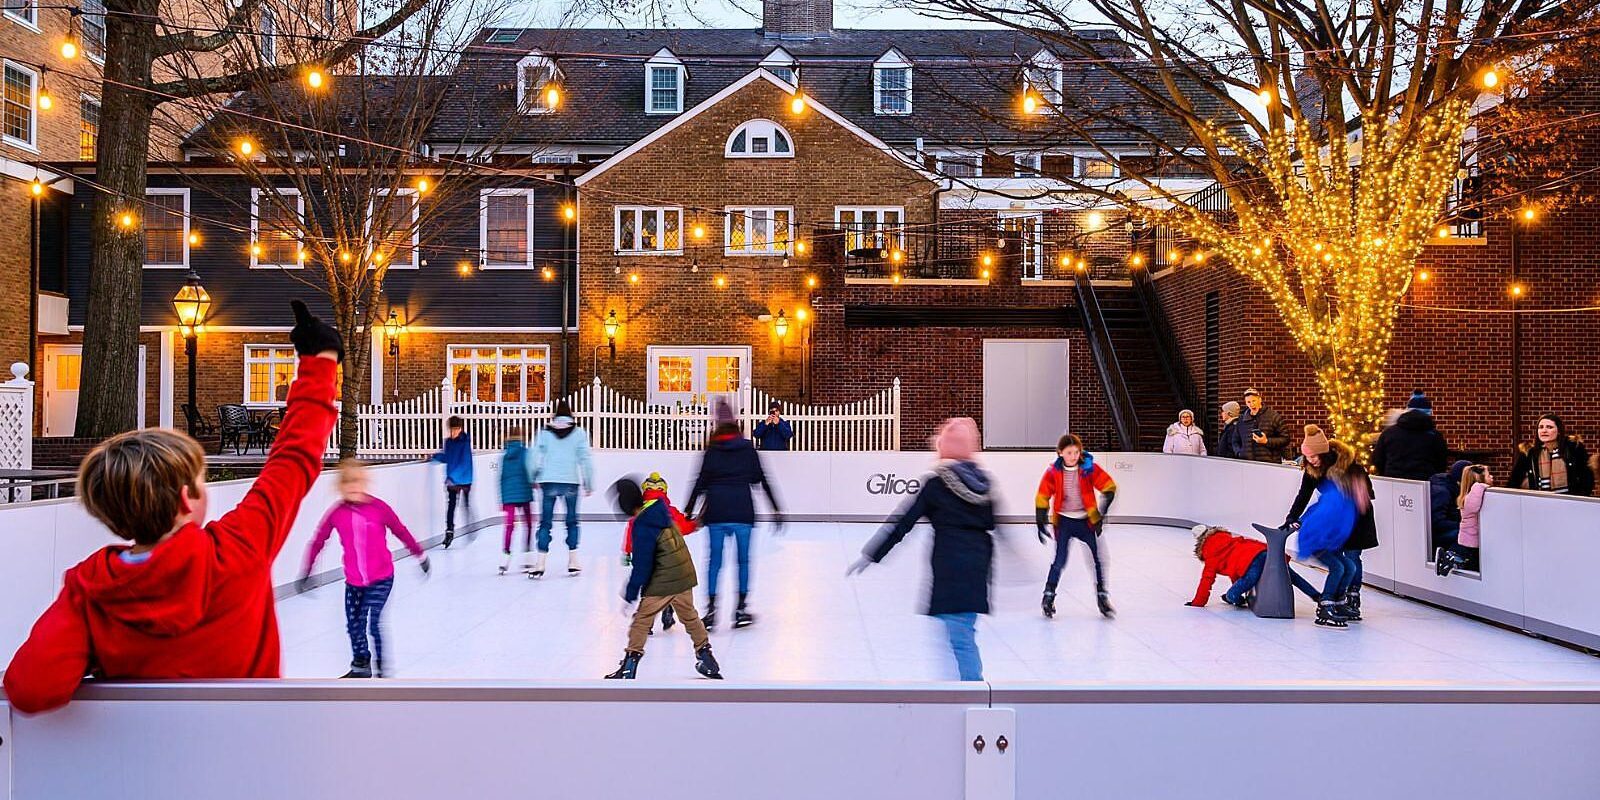 Things to do in New Jersey in Winter